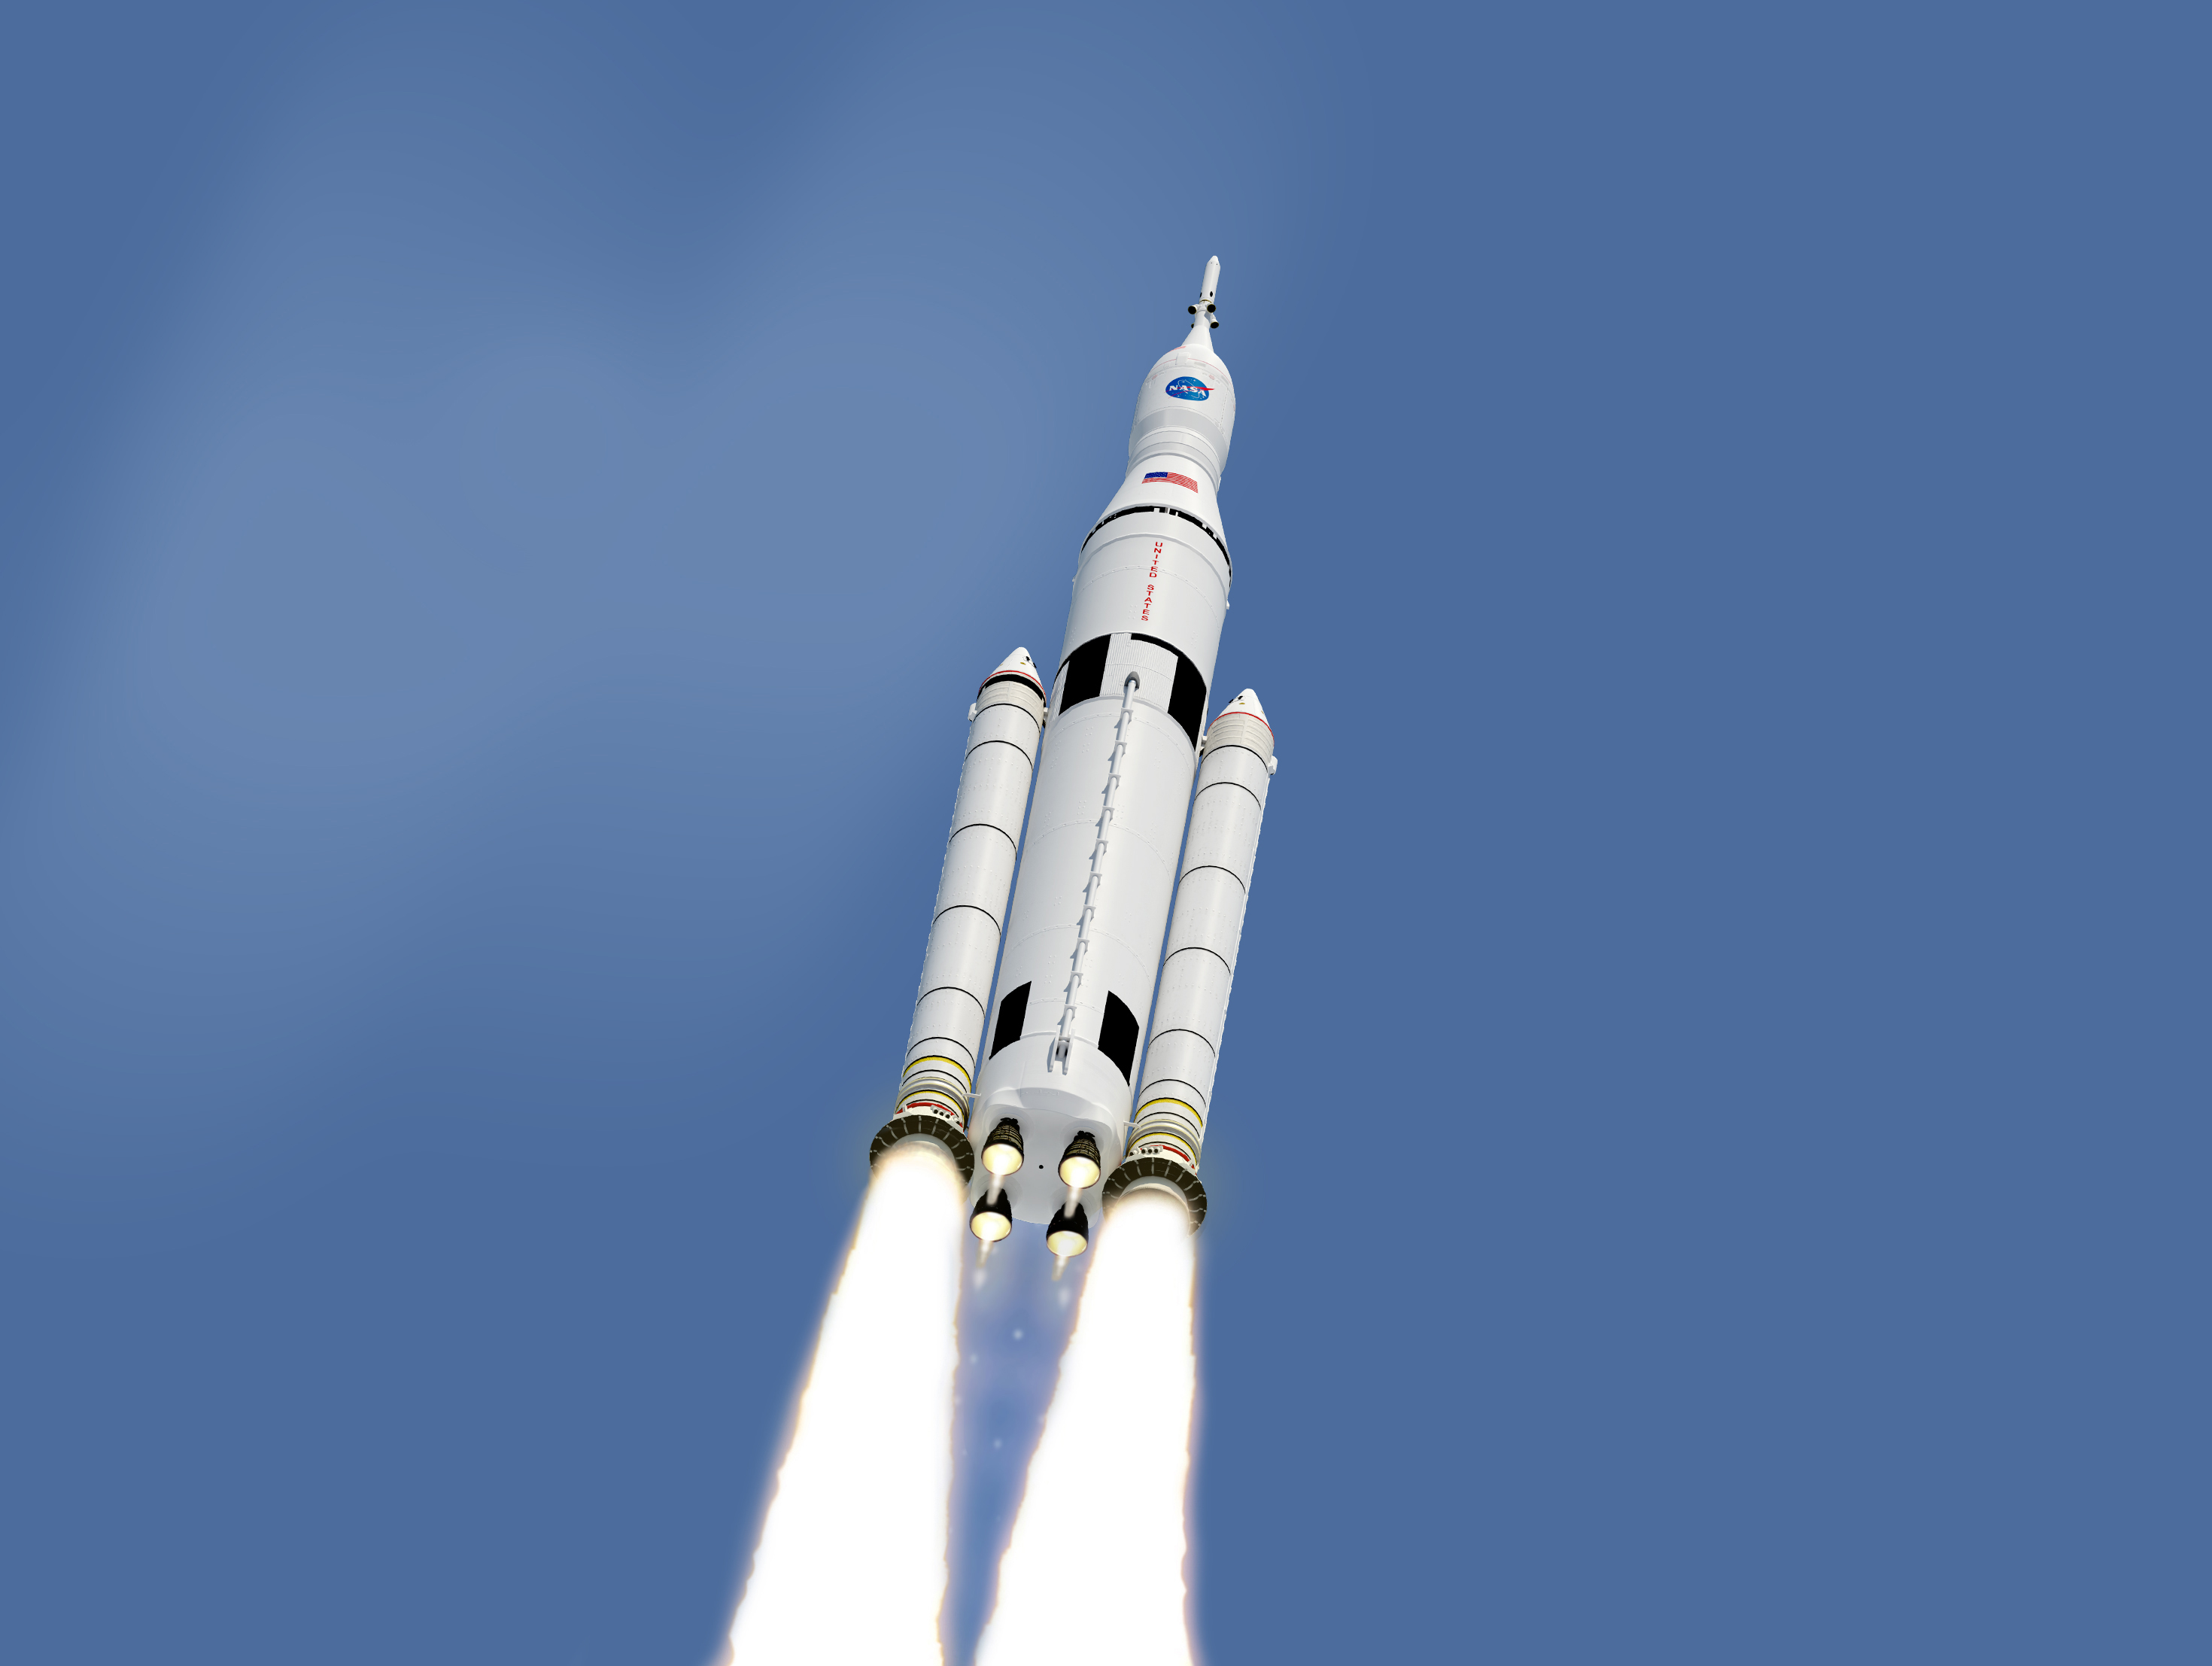 An artist's impression of what the Space Launch System rocket may look like once complete.